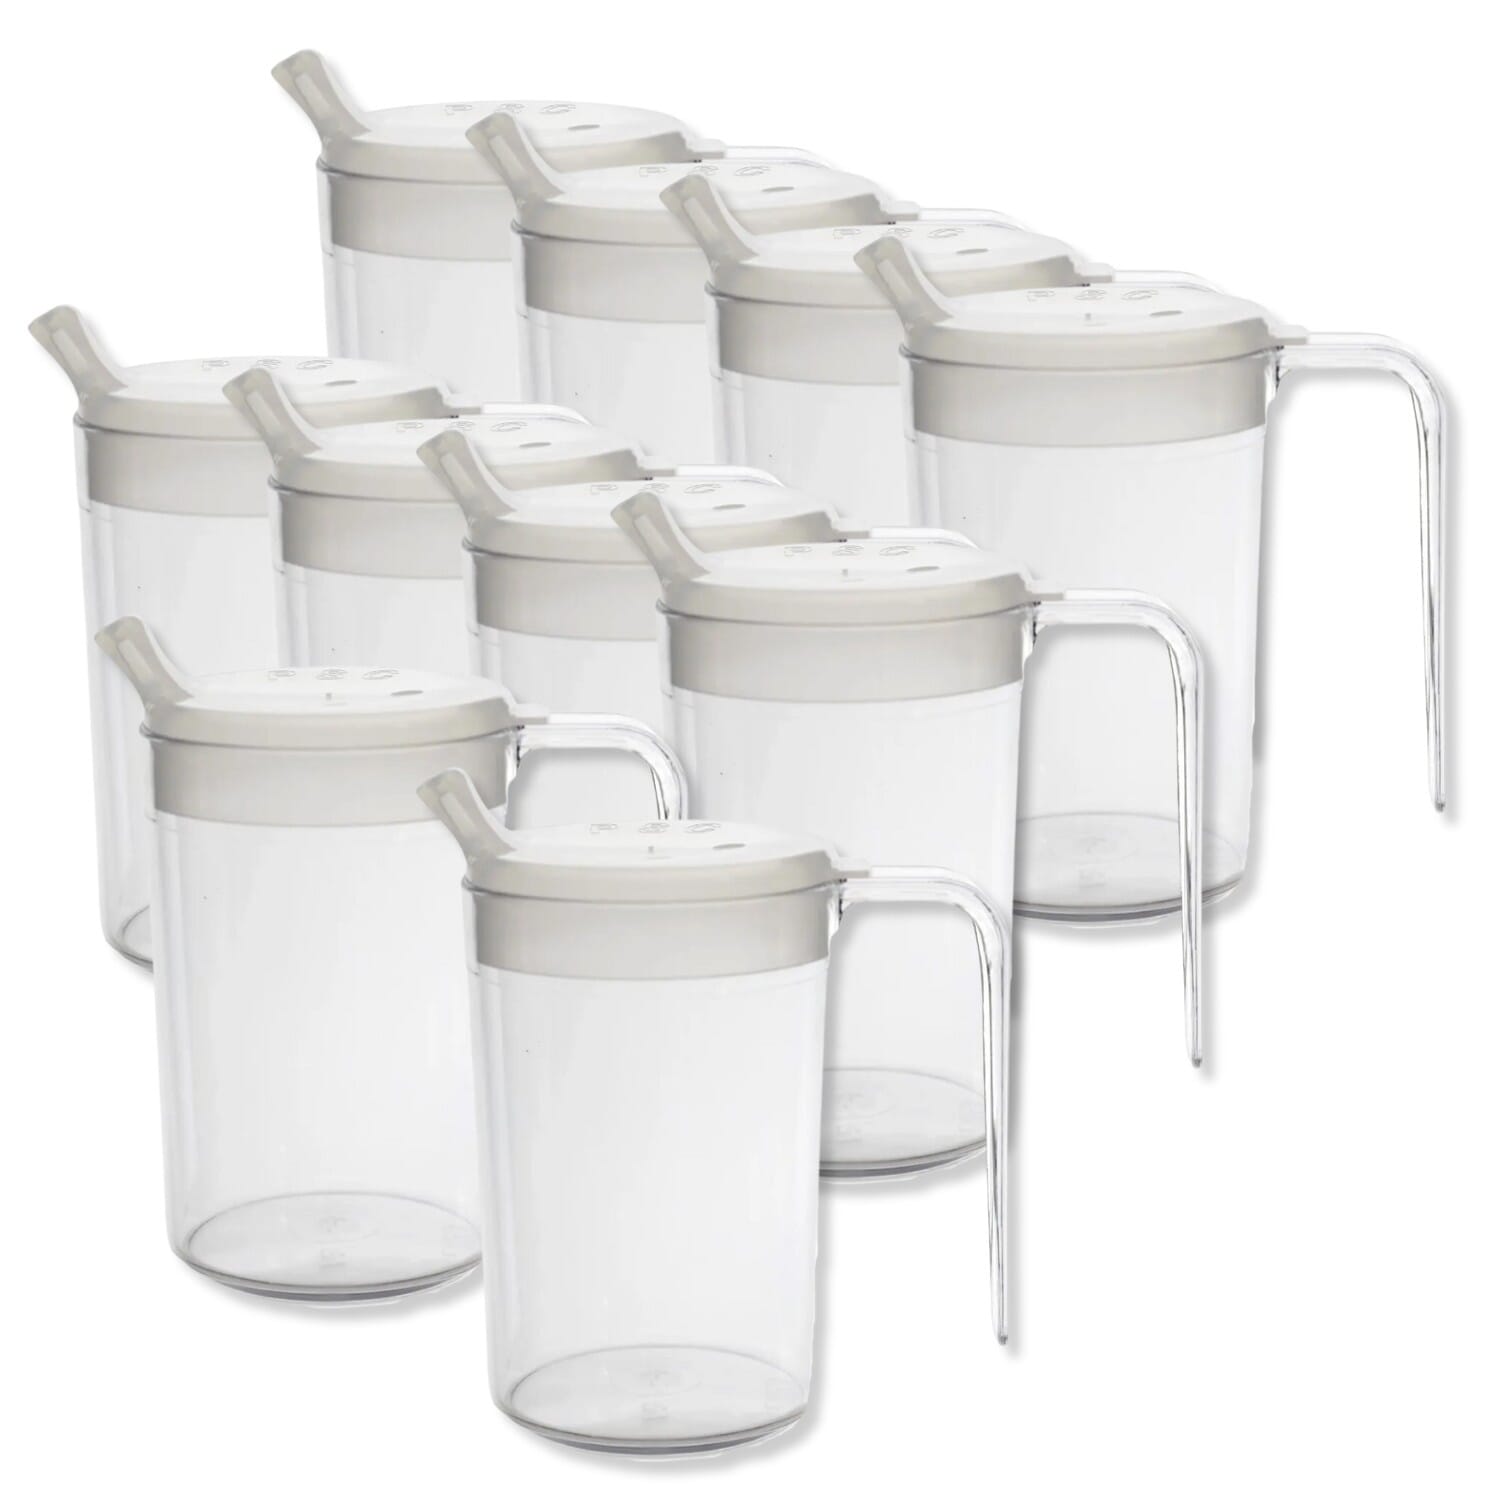 View Transparent Feeding Cup Pack of 10 information